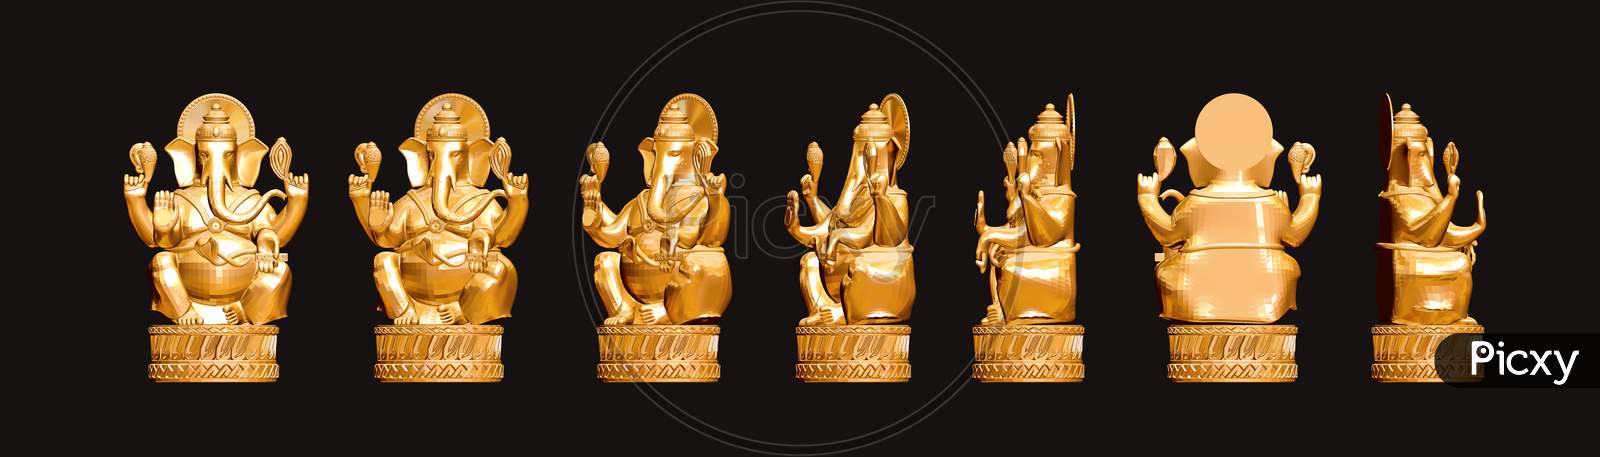 Indian God 3Ds Model, Lord Ganesha Statue 3D Model From Different Angles, Matte Painting Of Indian God For Vfx And Movie Post Production Projects